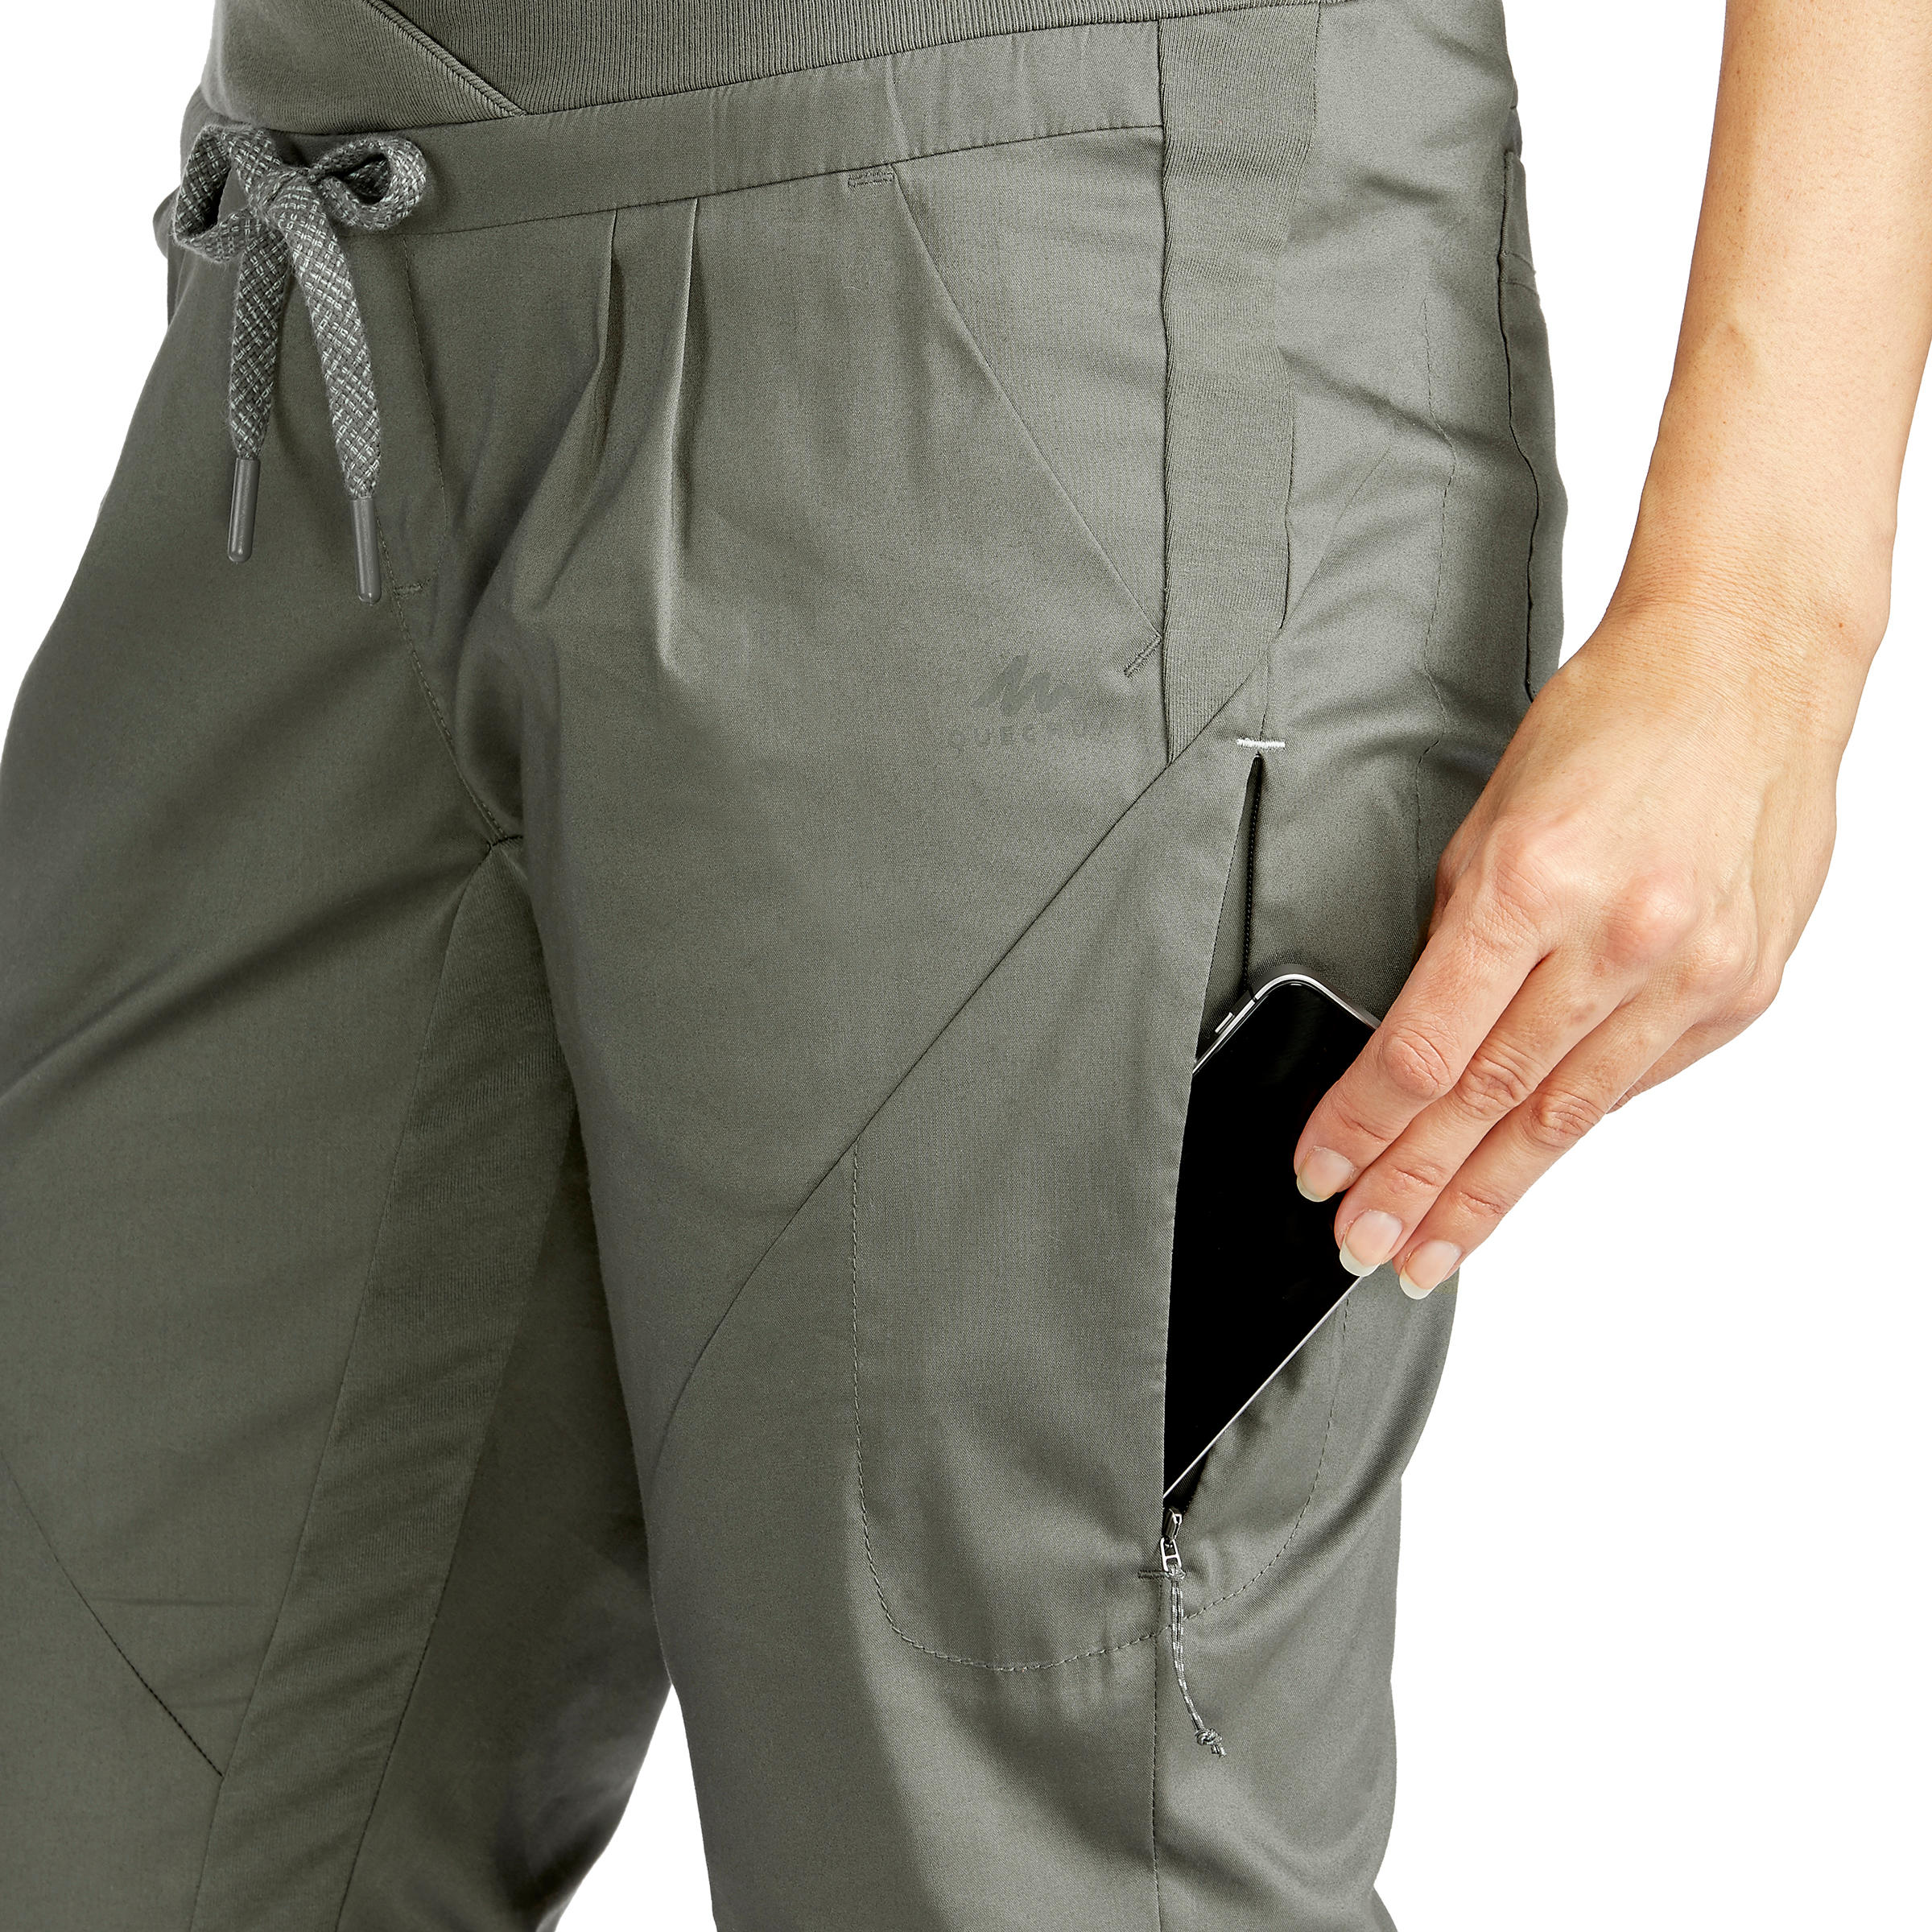 WCTS 500 WOMAN TROUSER BLACK By Decathlon